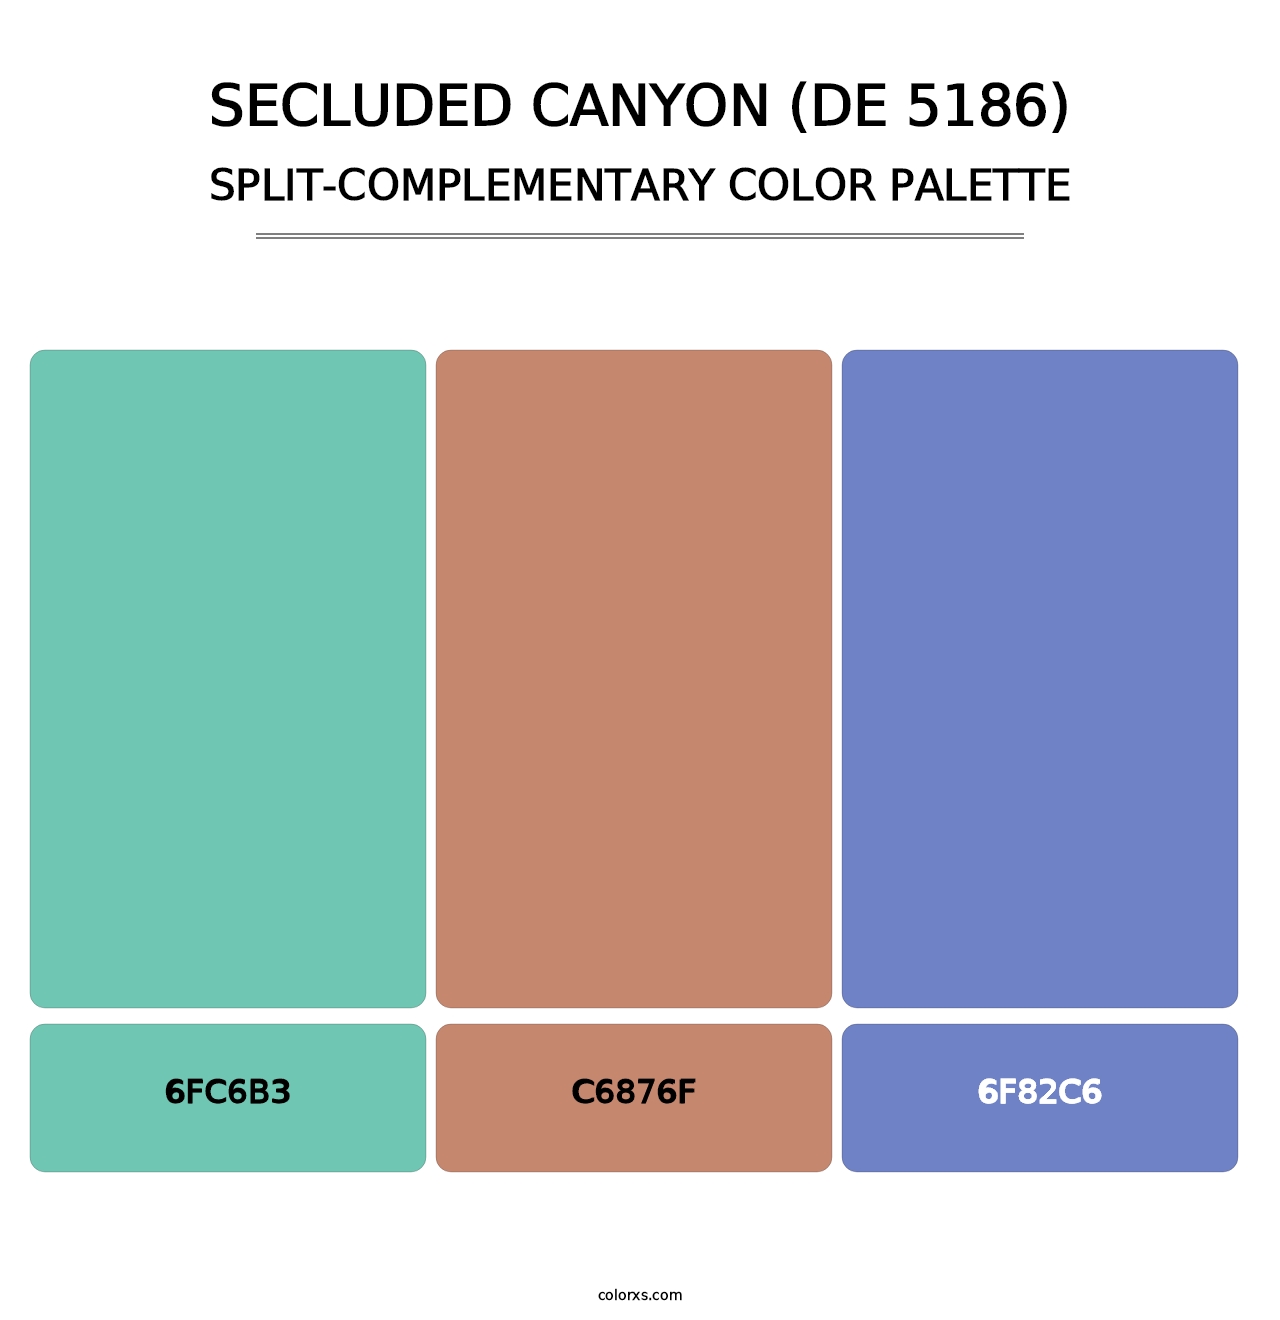 Secluded Canyon (DE 5186) - Split-Complementary Color Palette